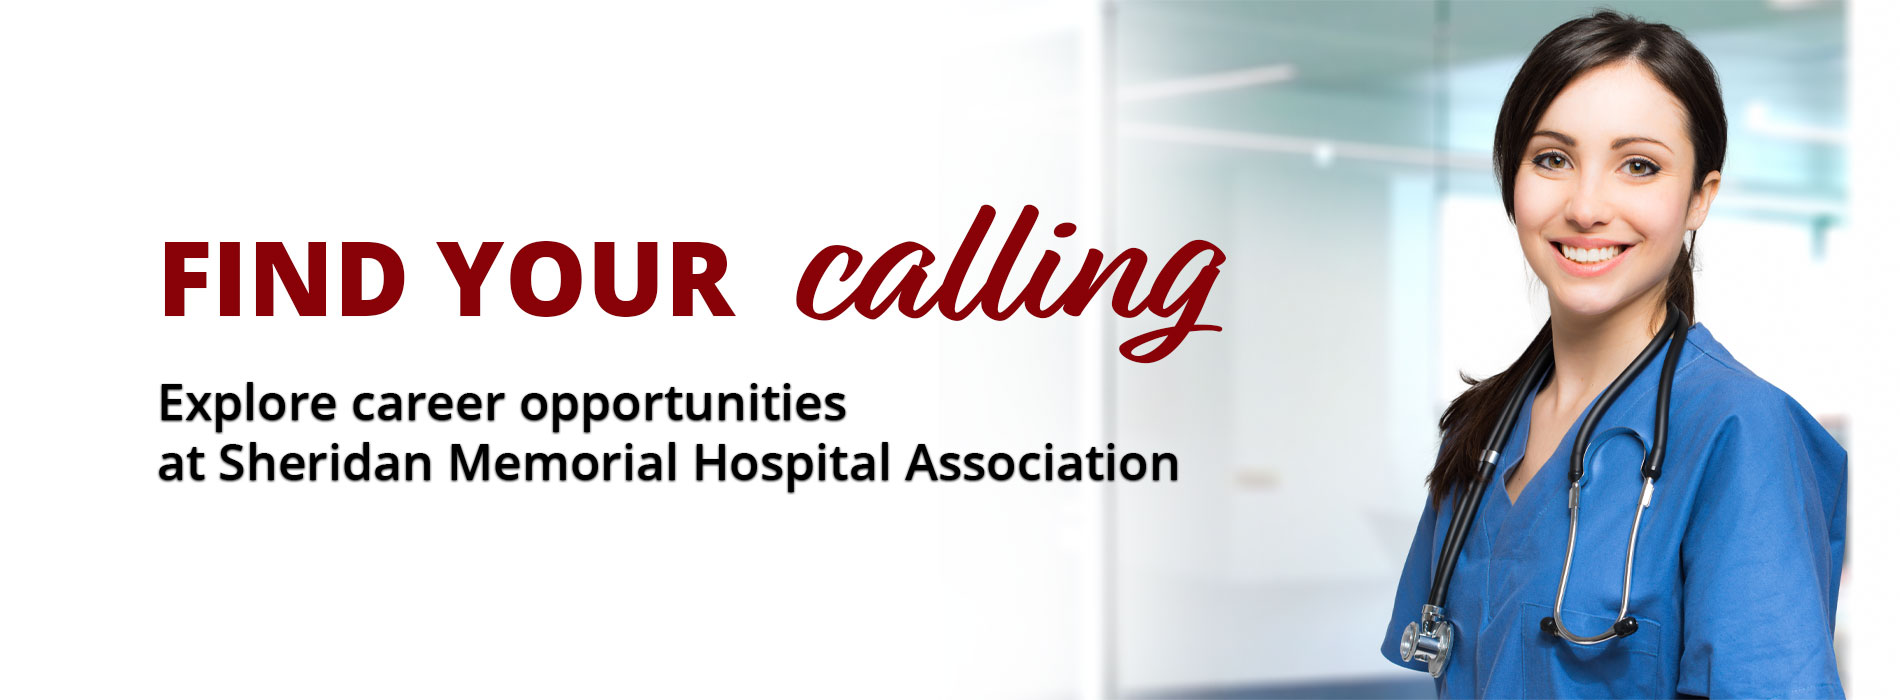 Banner picture of a female Nurse smiling. She is wearing scrubs and a stethoscope around her neck. Banner says:
FIND YOUR calling
Explore career opportunities at Sheridan Memorial Hospital Associations.